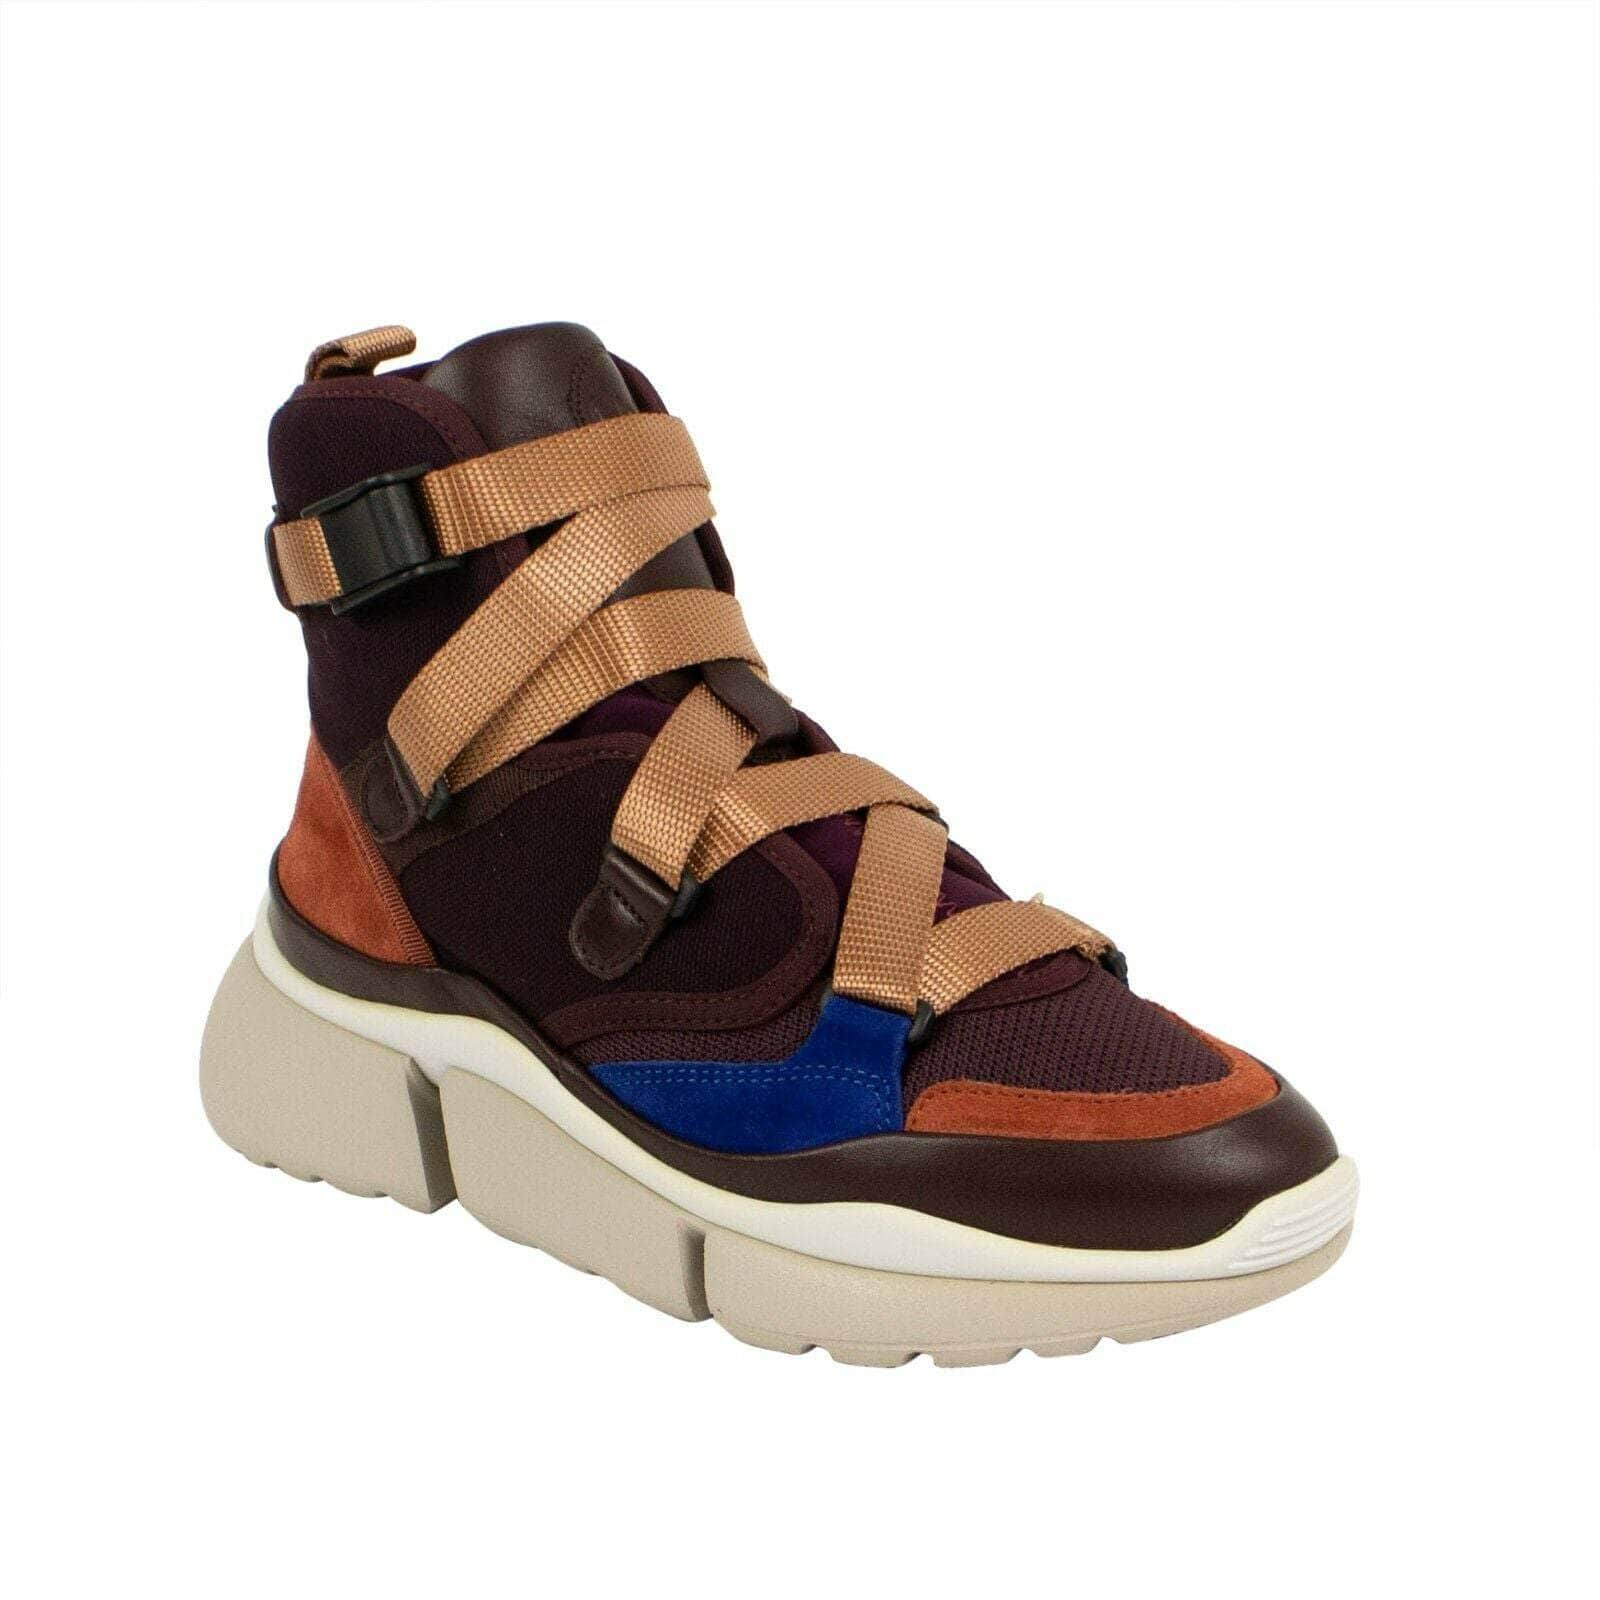 Chloe 250-500, BFBagandShoe, chicmi, chloe/burberry, couponcollection, gender-womens, main-shoes, size-36-eu 36 EU Suede 'Sonnie' High-Top Sneakers - Dark Purple 69LE-2393/6 69LE-2393/6